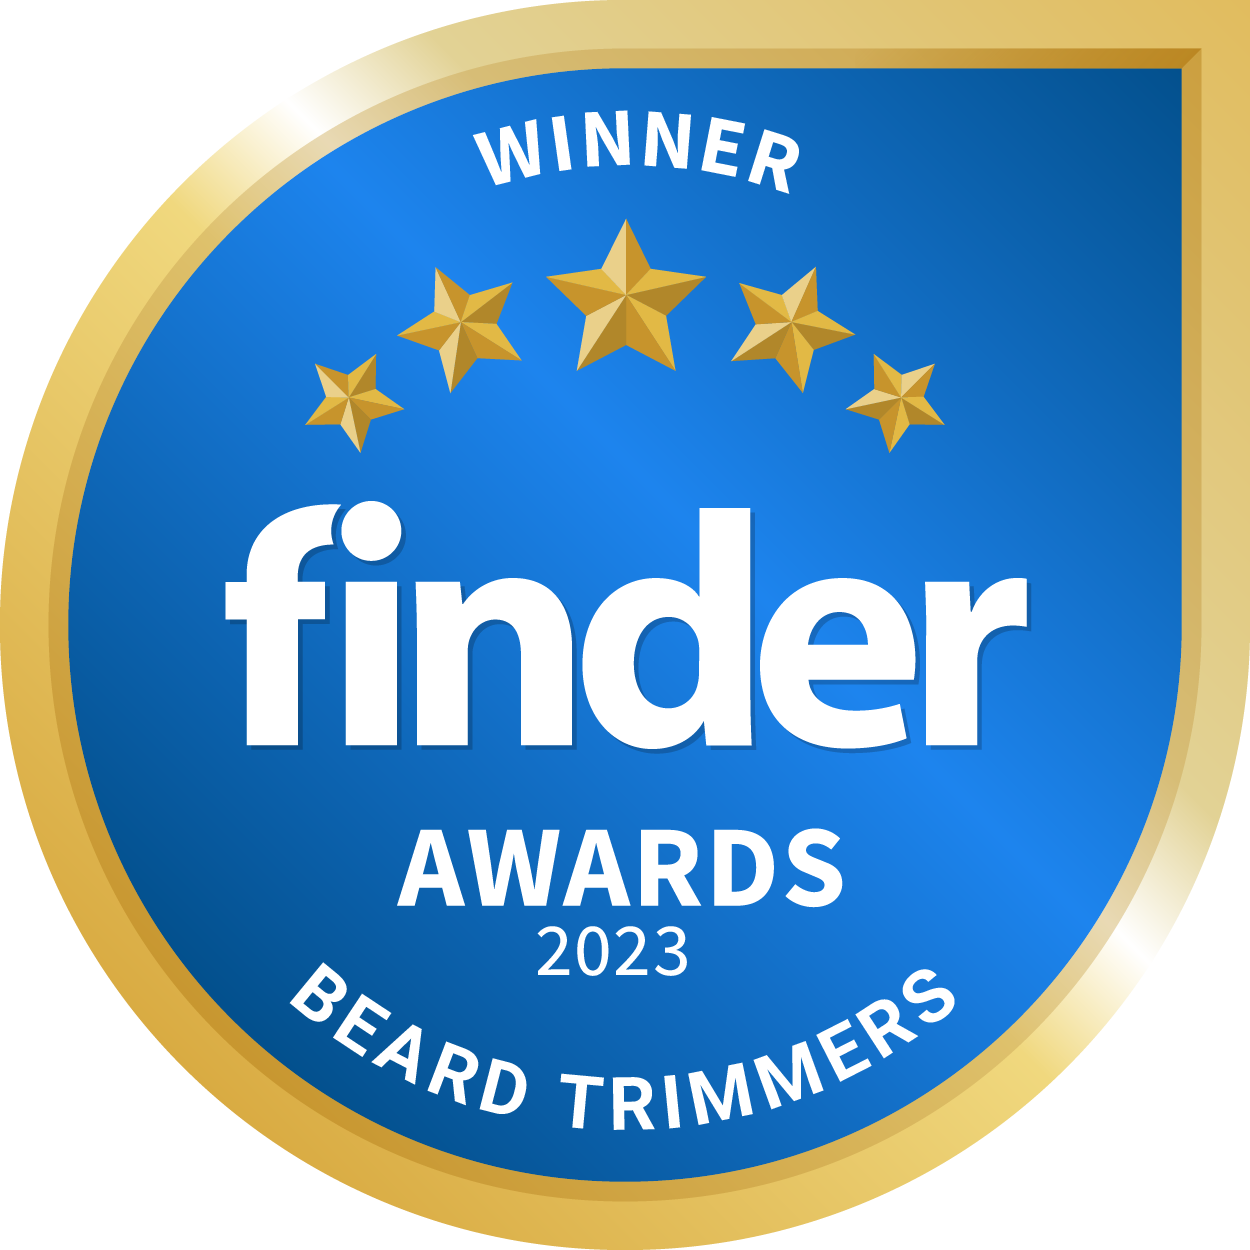 Best rated beard trimmer brand